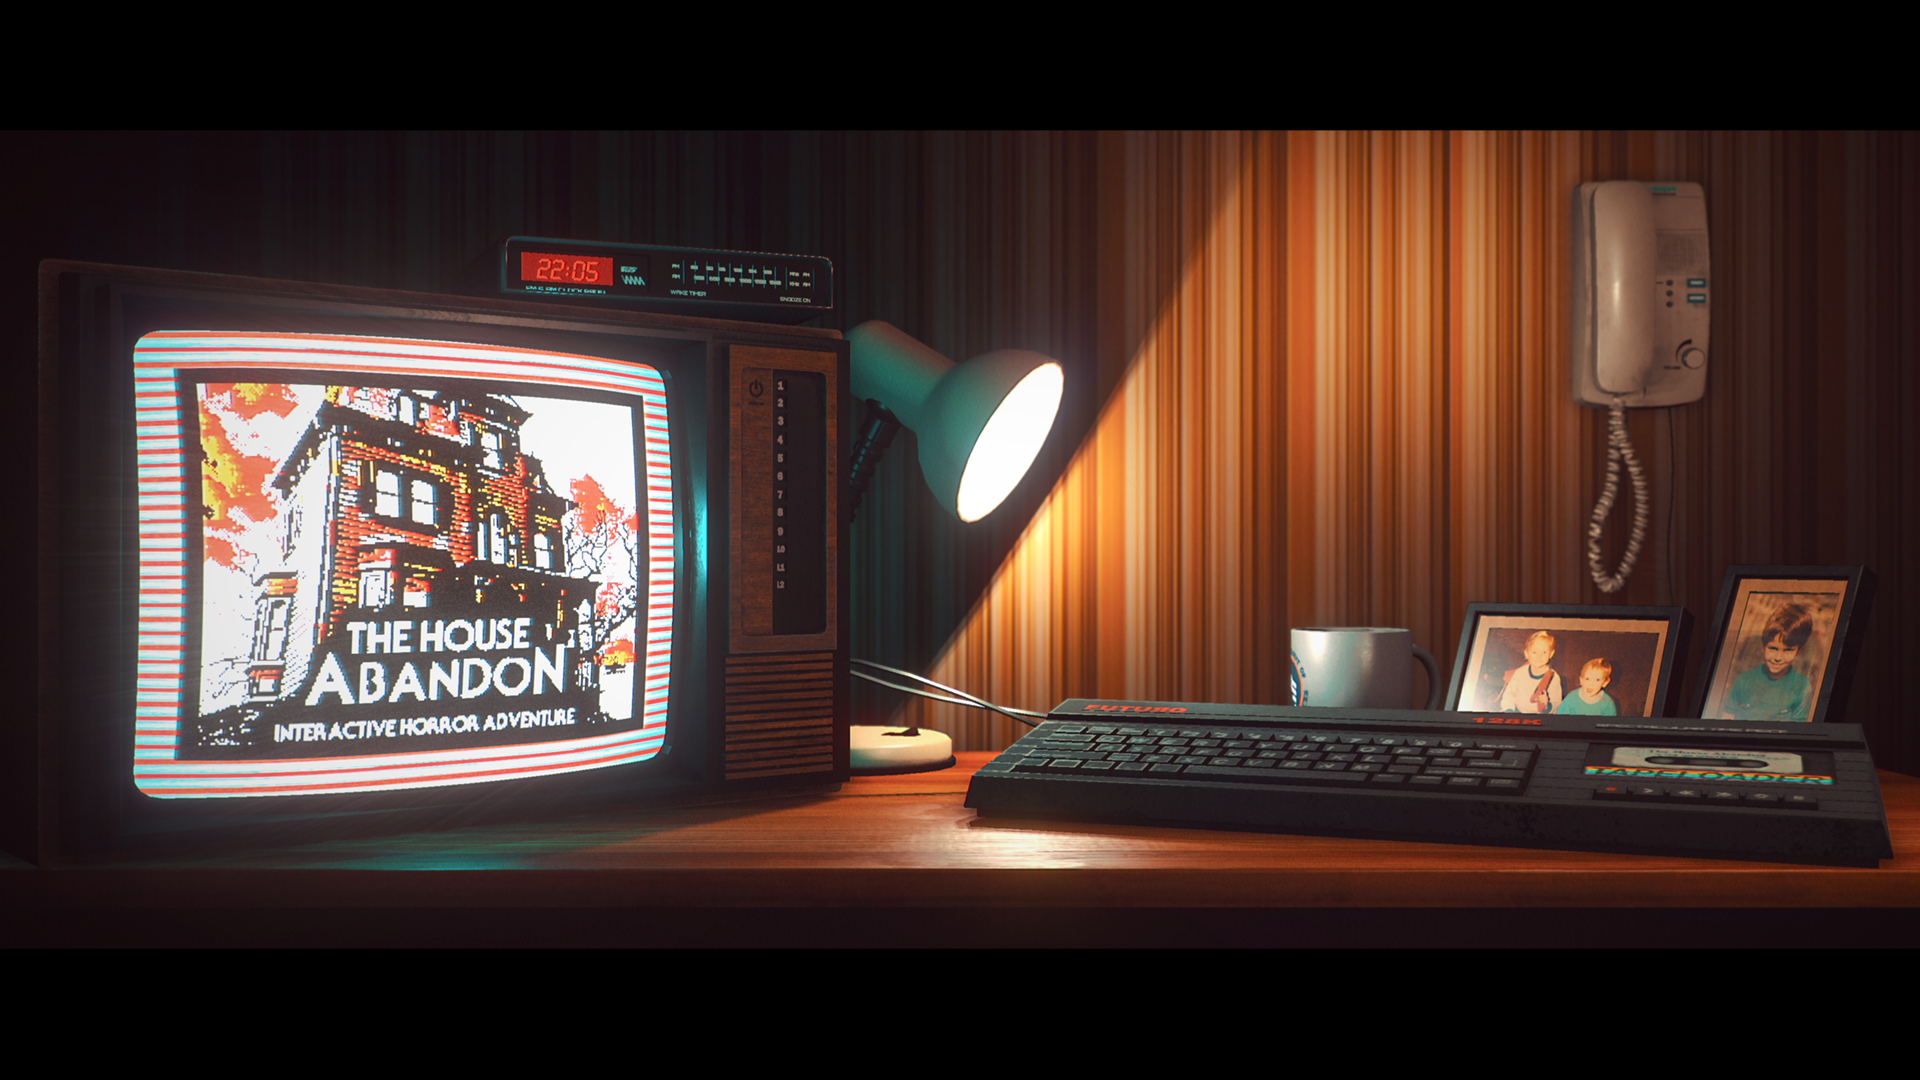 Best retro games: Stories Untold. Image shows an image of a desktop with a keyboard, lamp, photos, a mug, and a monitor showing the title screen of "The House Abandon. Interactive Horror Adventure"